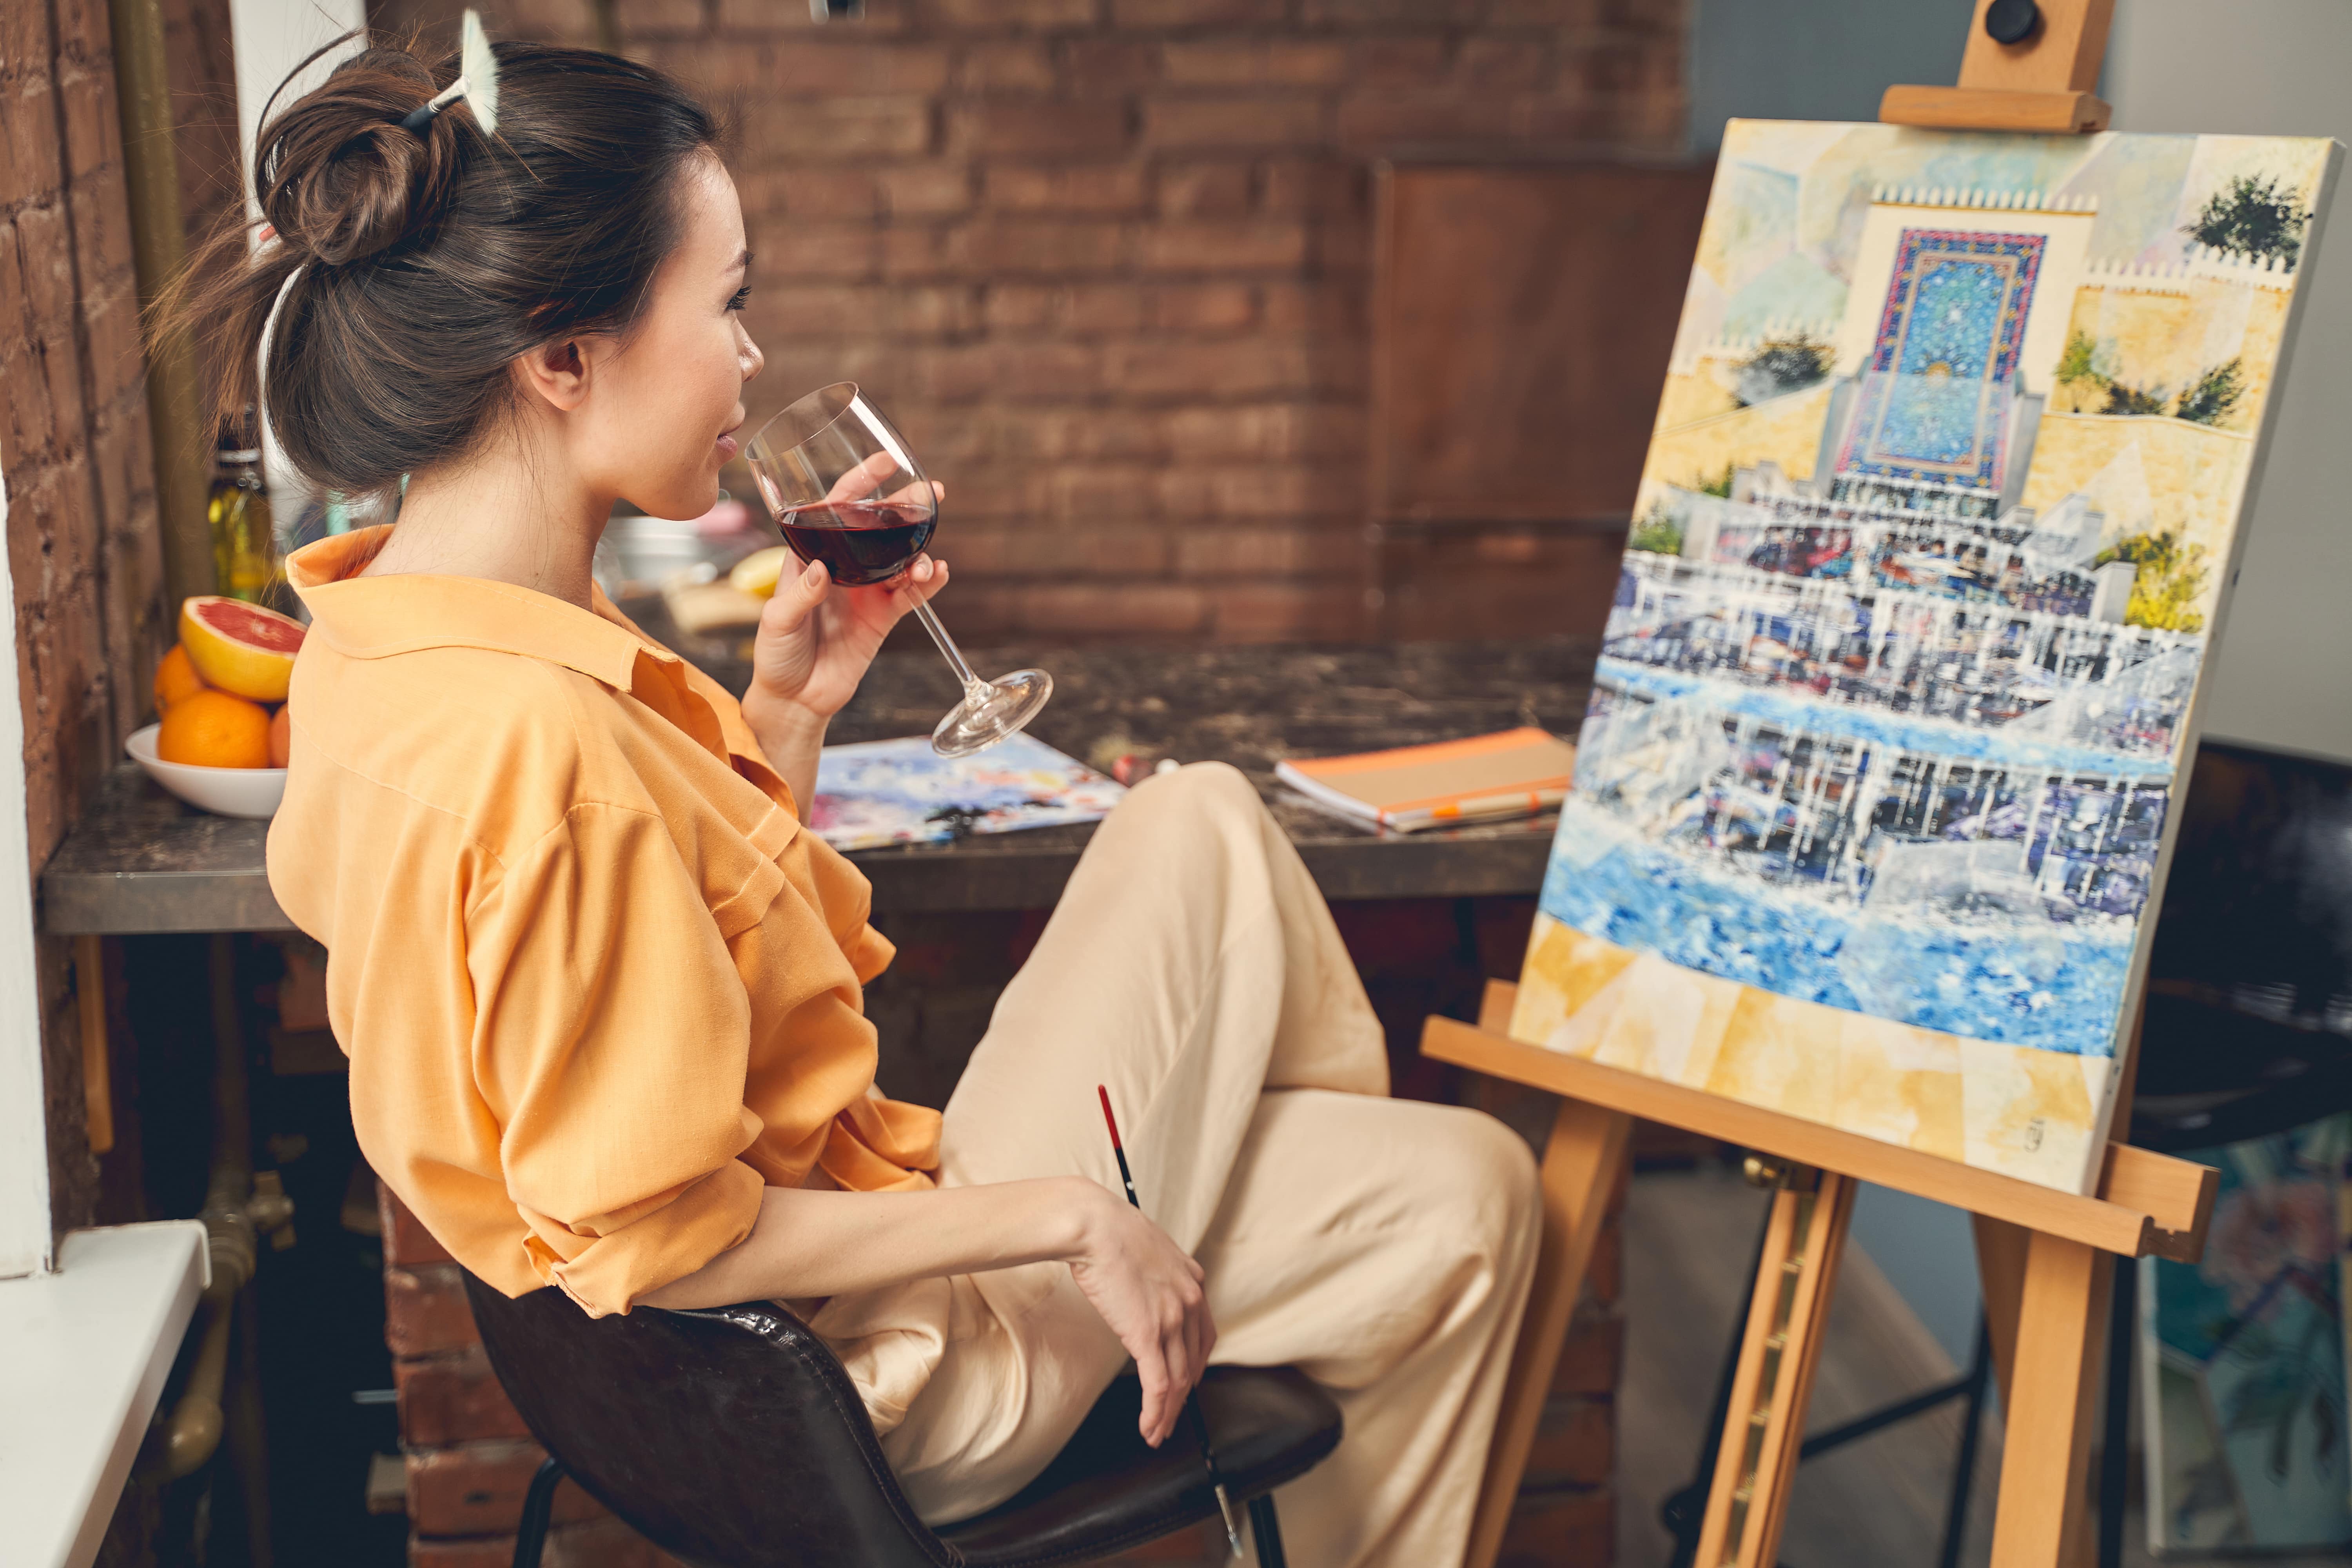 A woman sat at an easel with a glass of red wine in hand. She is about to take a sip as she surveys the progress of her masterpiece so far.